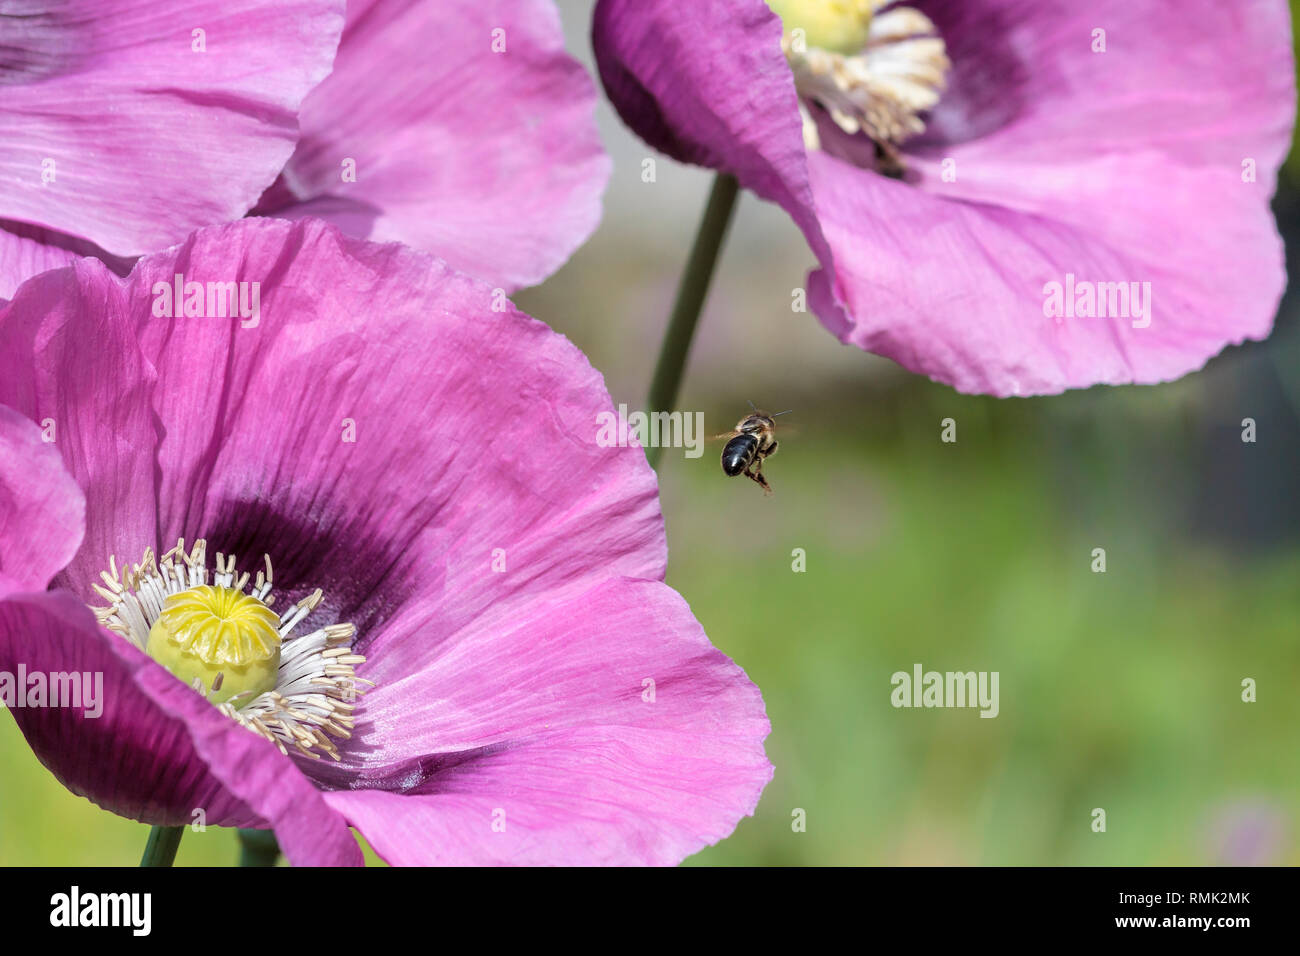 A single bumblebee, in mid-air, is flying to the next flower among a trio of three bright pink poppies (blurred green background, early summer). Stock Photo